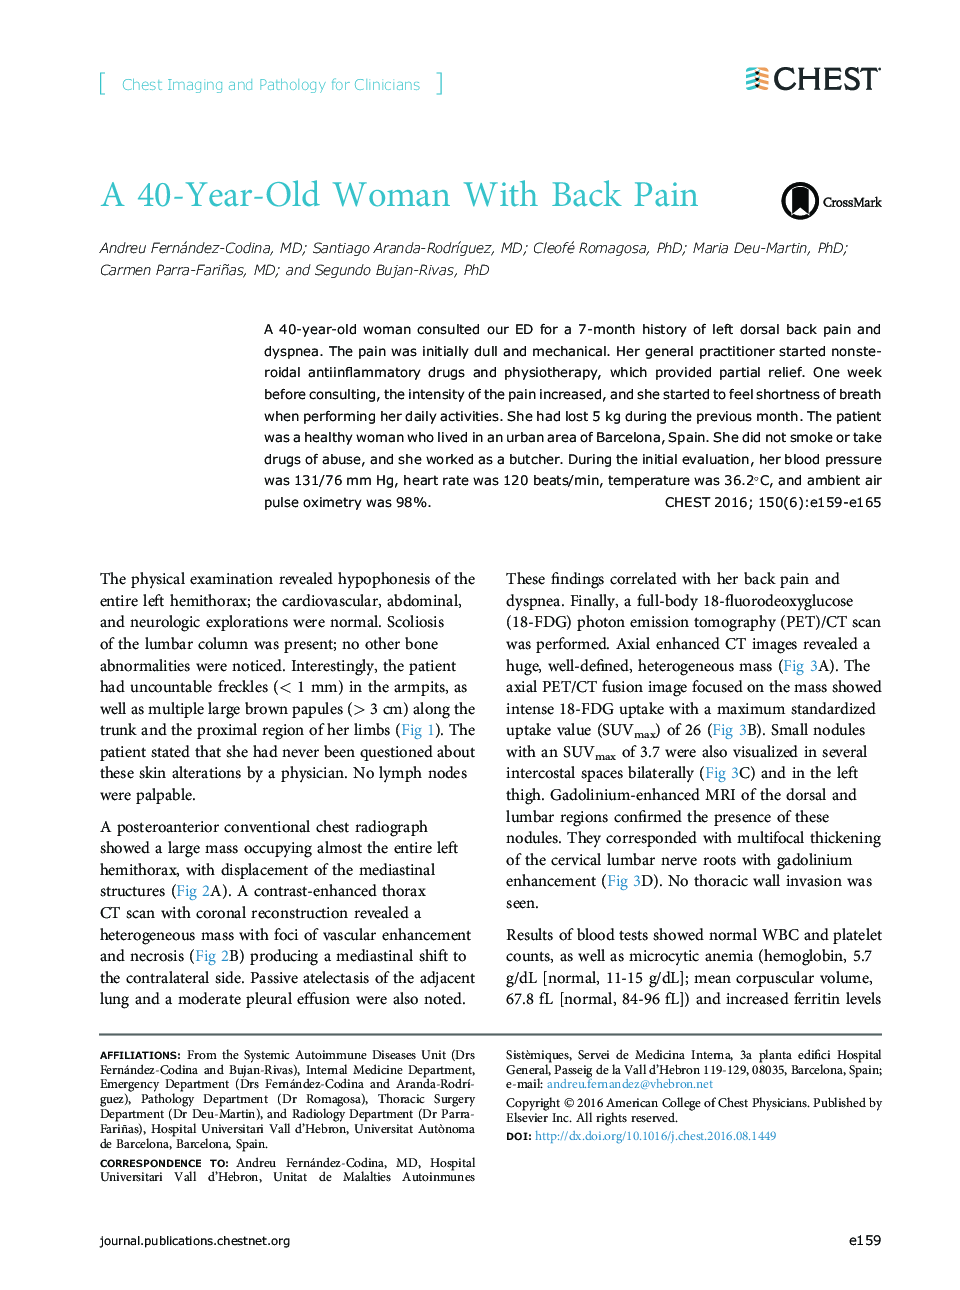 A 40-Year-Old Woman With Back Pain